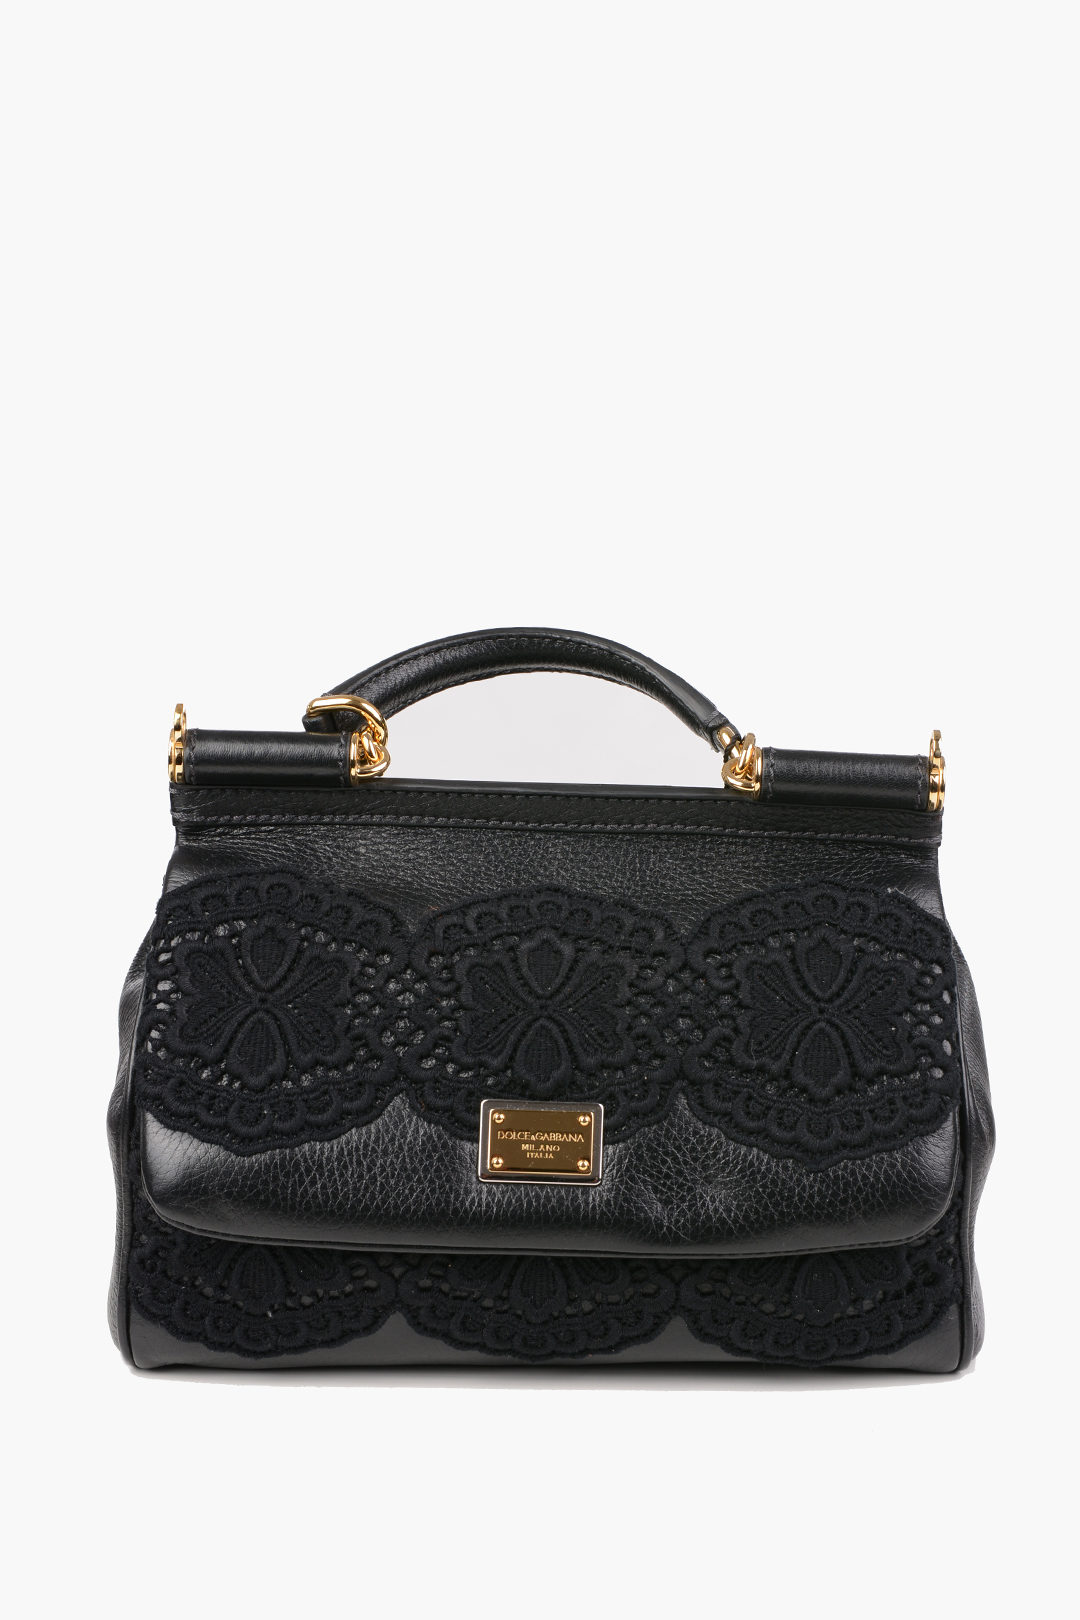 Dolce & Gabbana leather Bowler Bag with embroidered crochet women - Glamood  Outlet